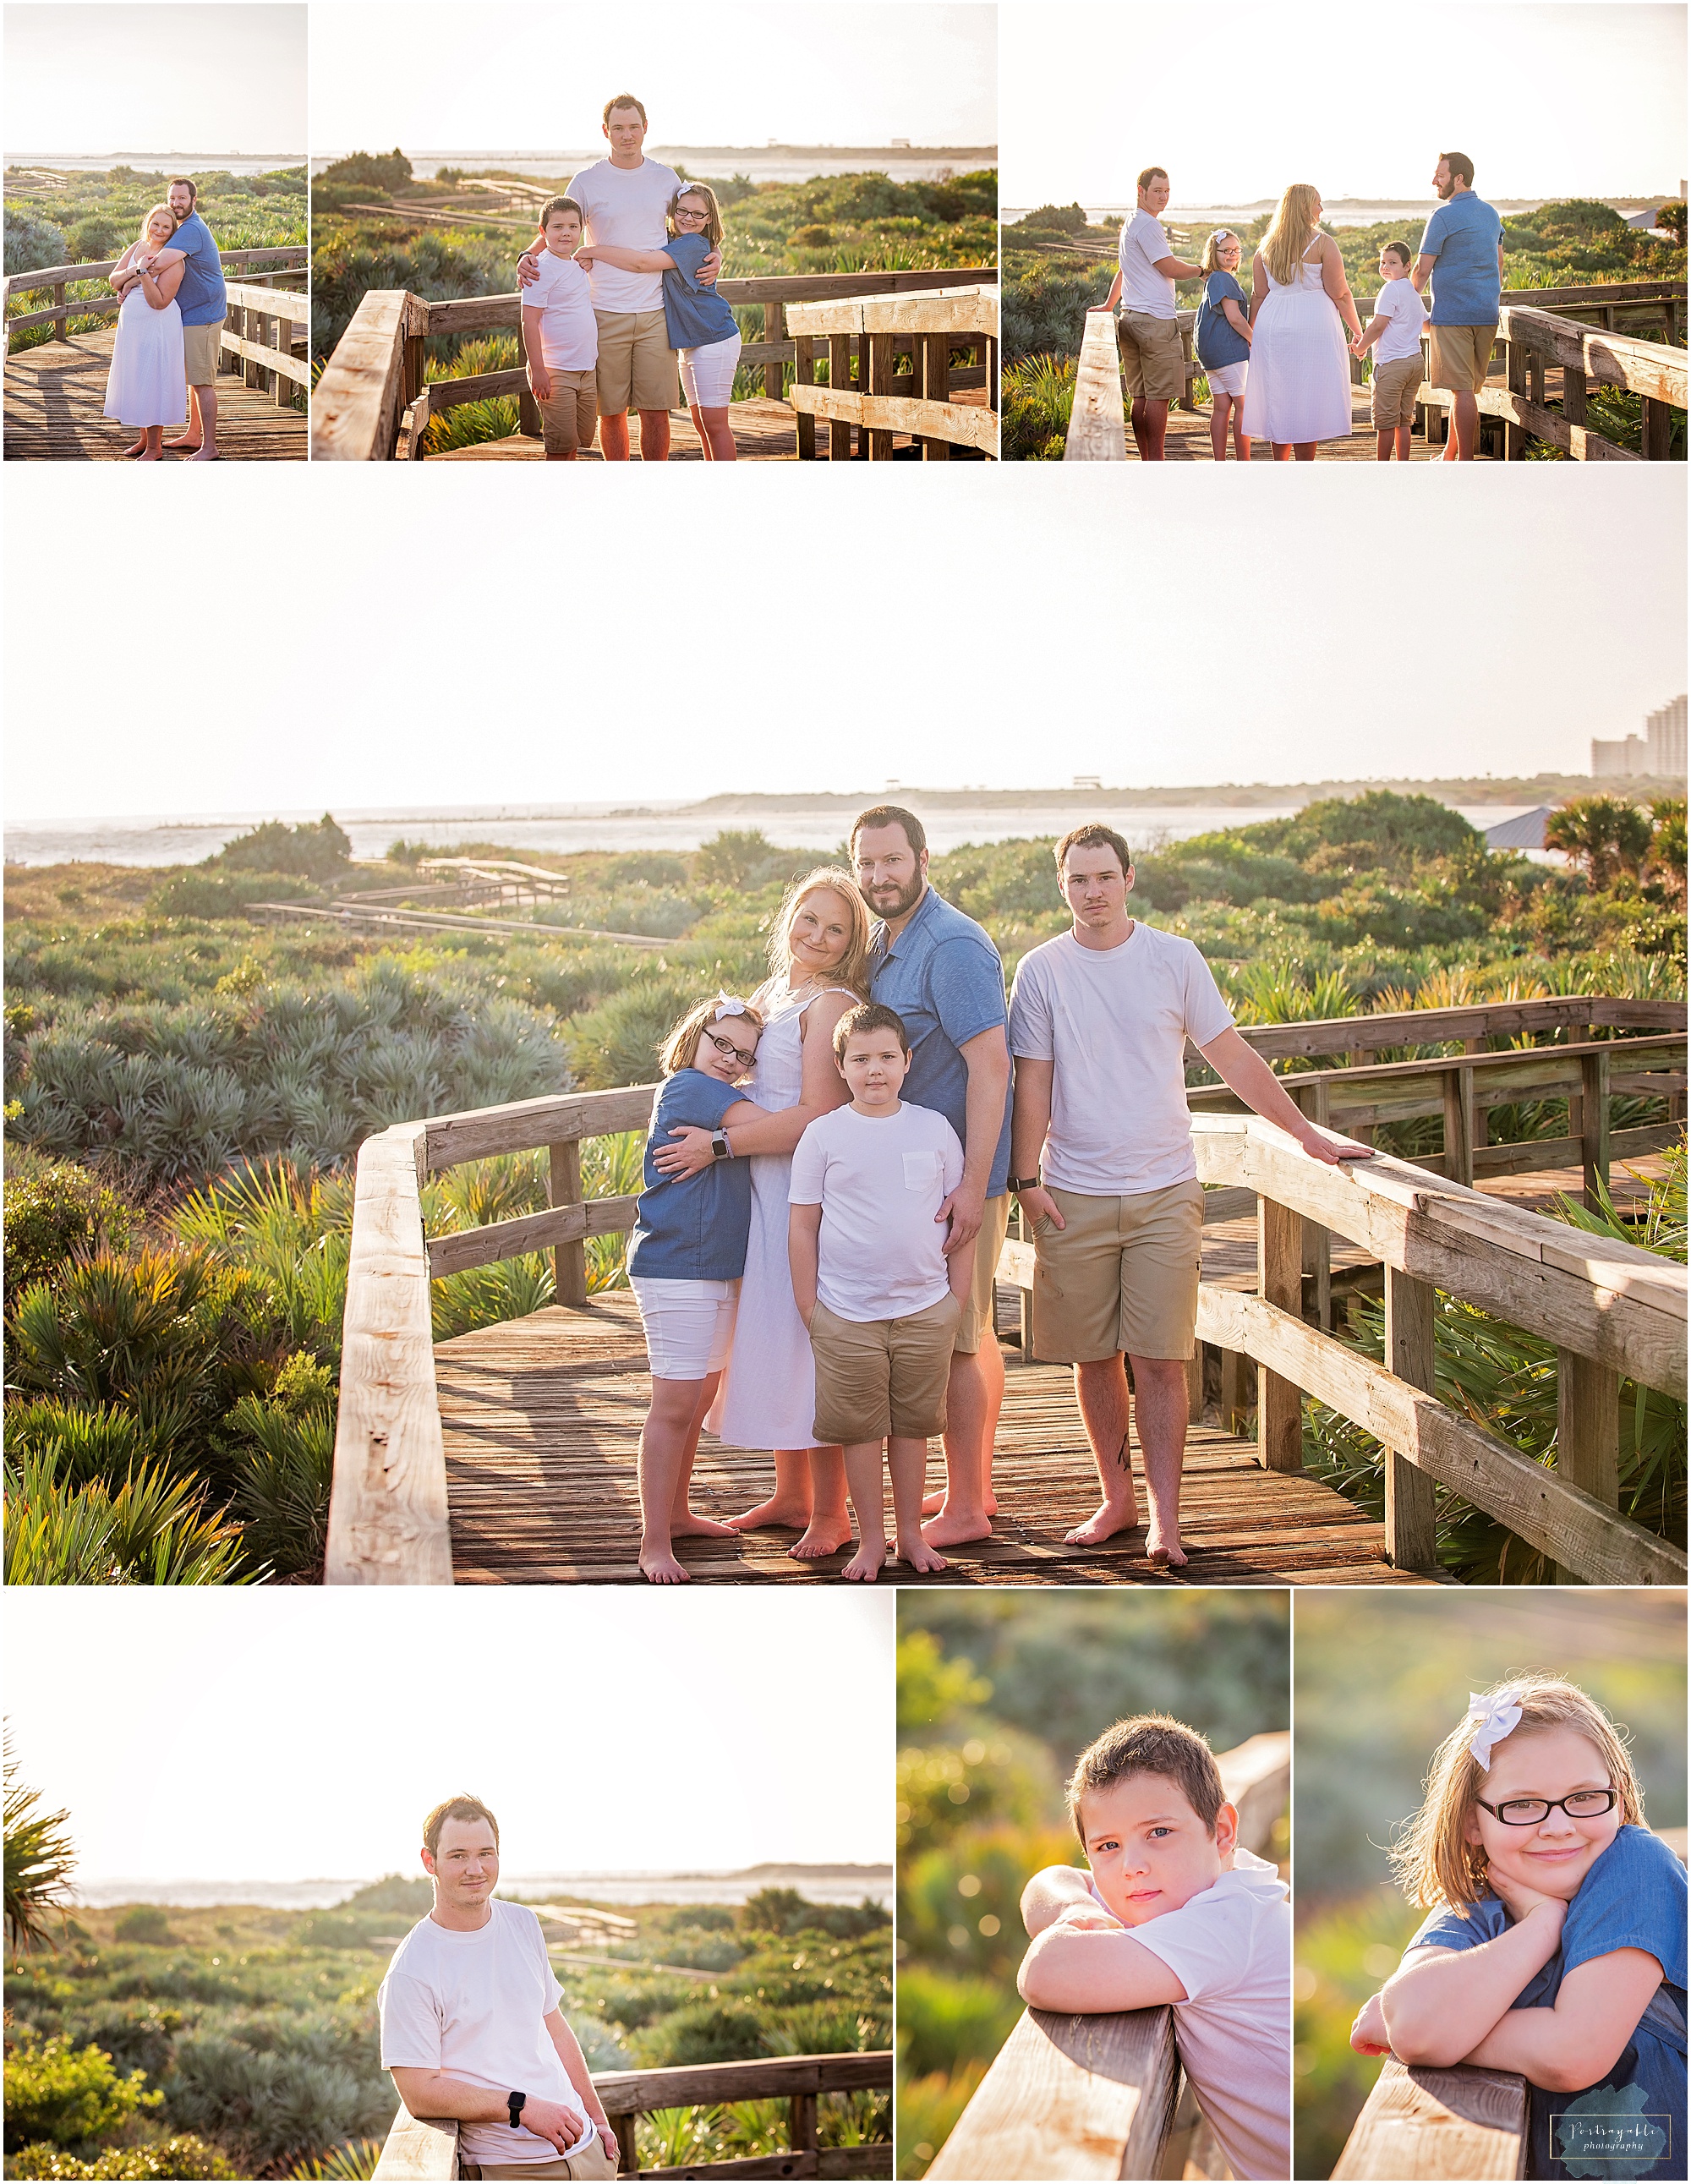 ponce-inlet-photographer